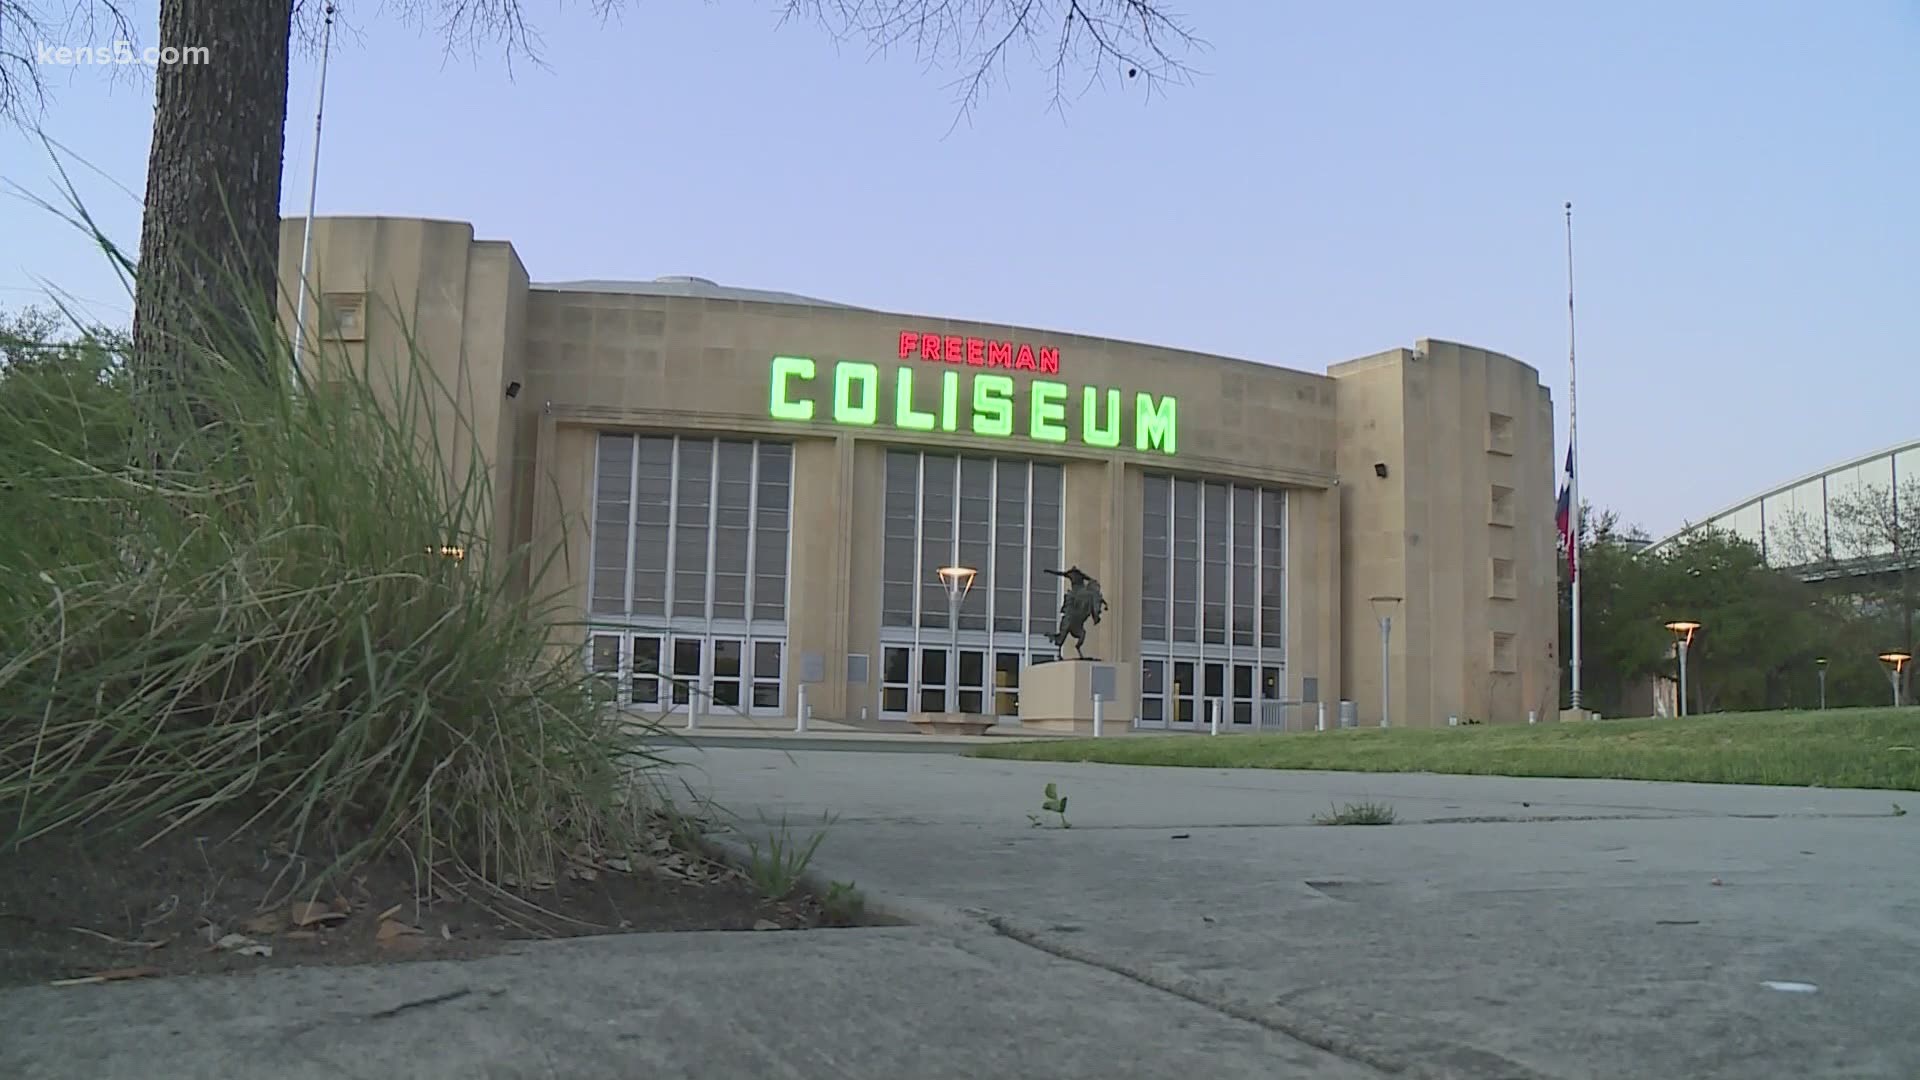 Bexar County officially reached a deal with the federal government on Friday to use Freeman Coliseum as a housing site.